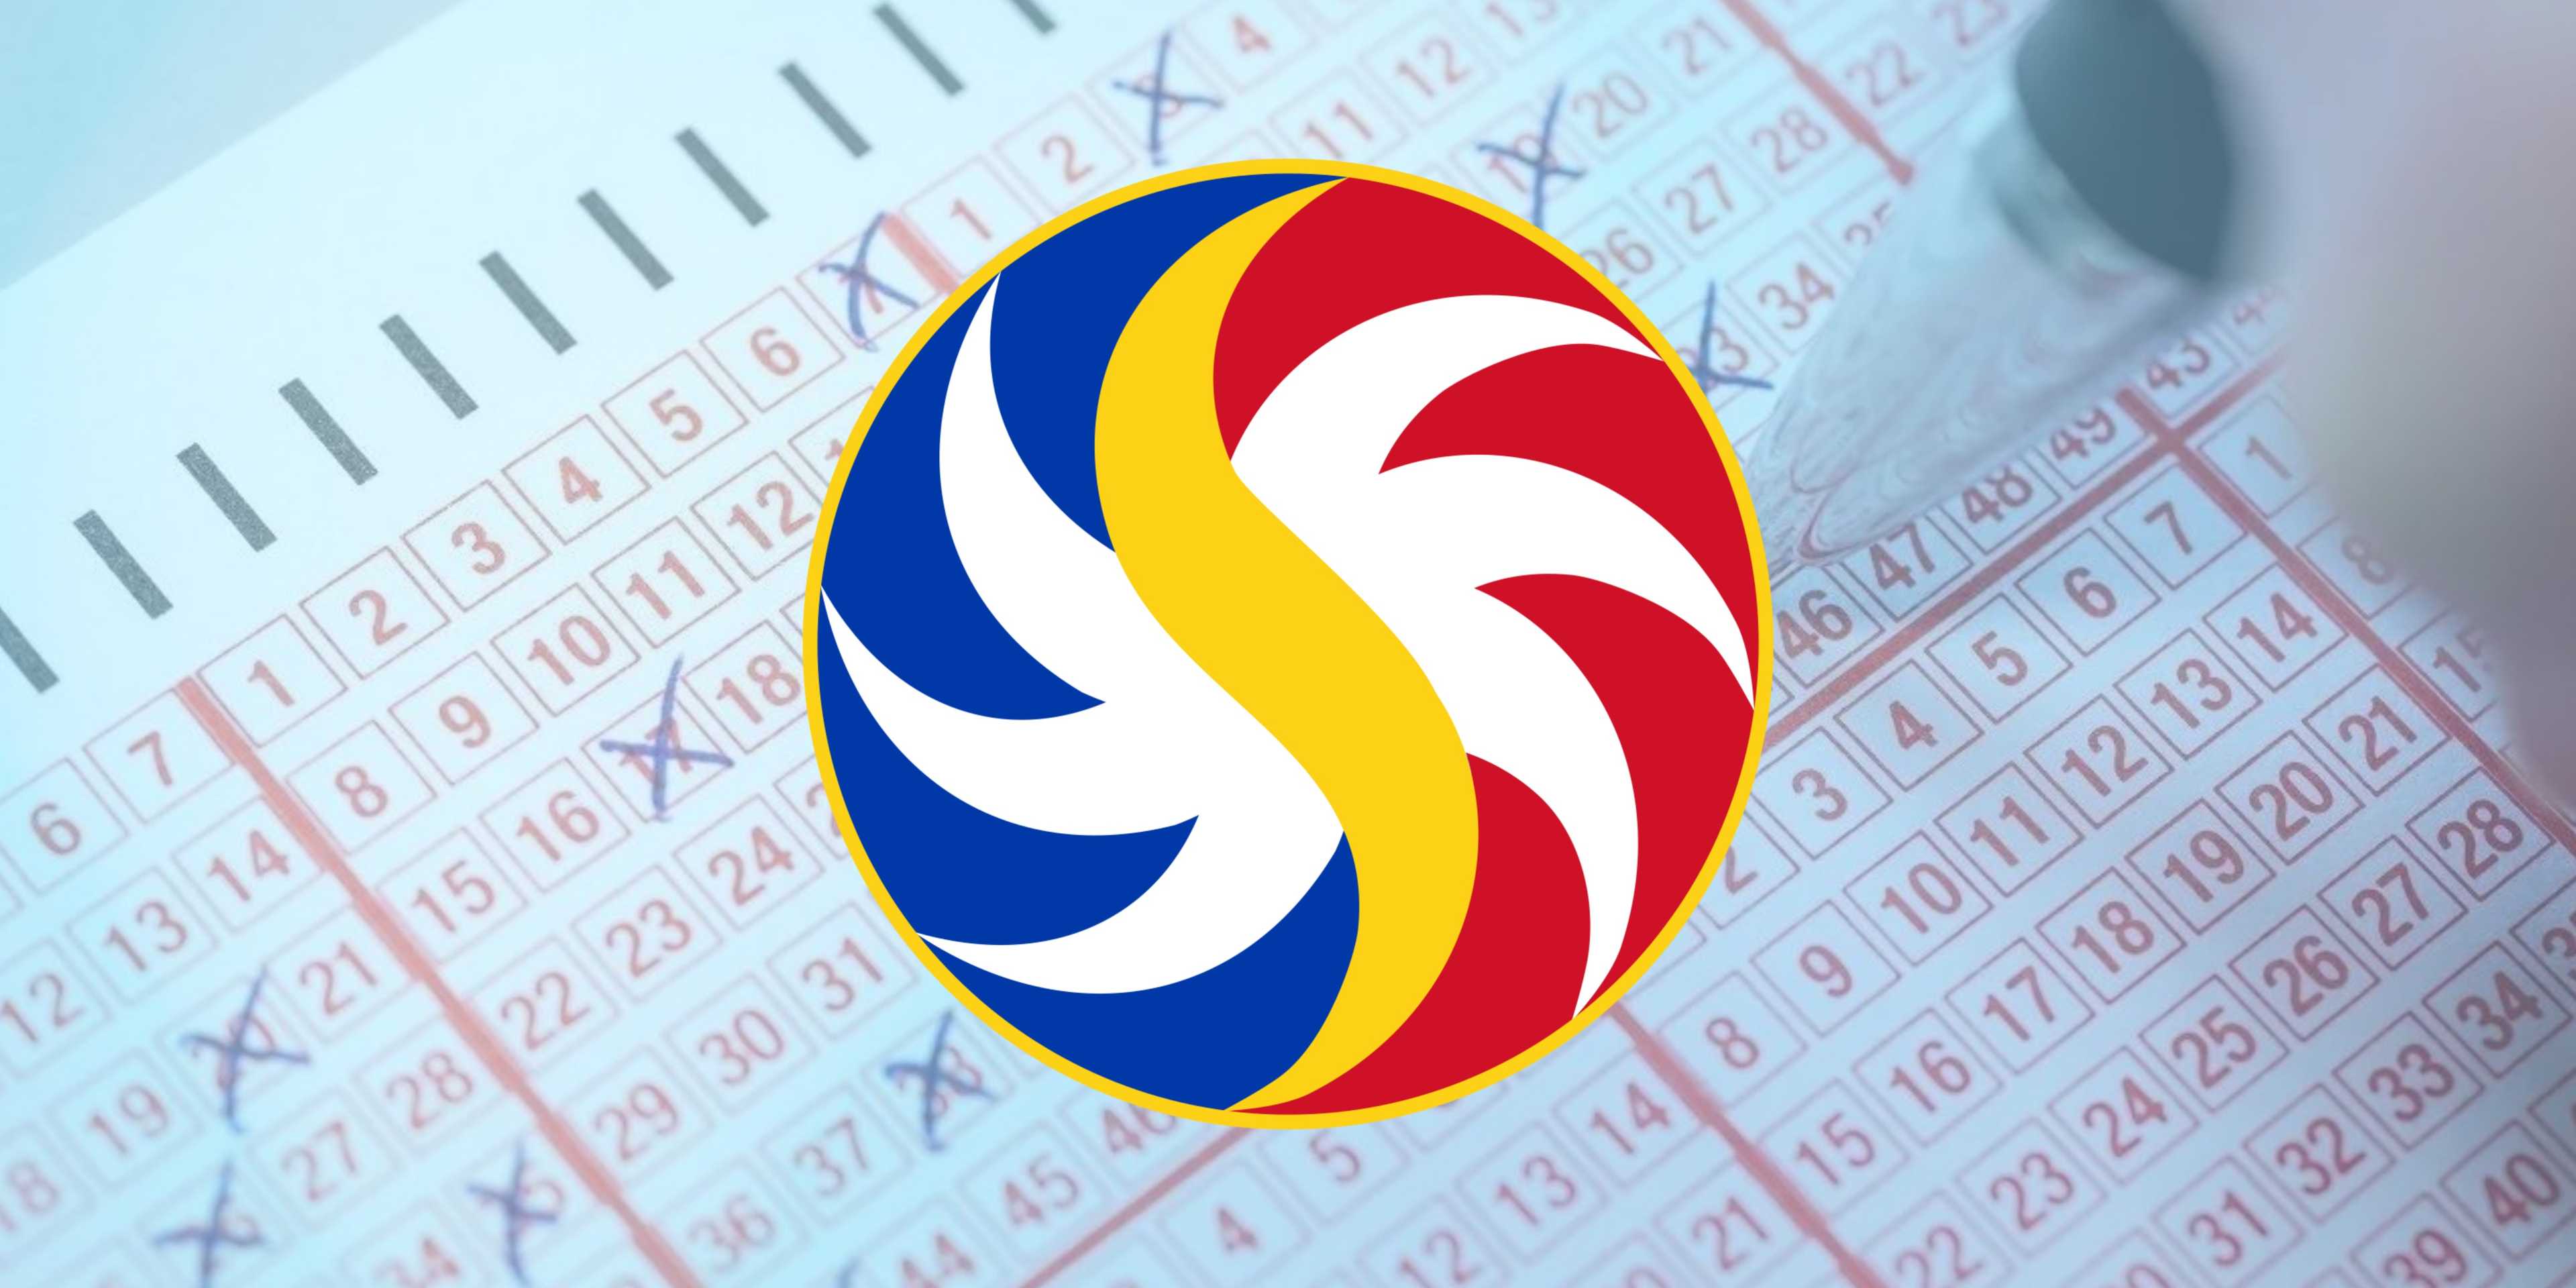 PCSO Lotto Draw Results on Monday, March 4